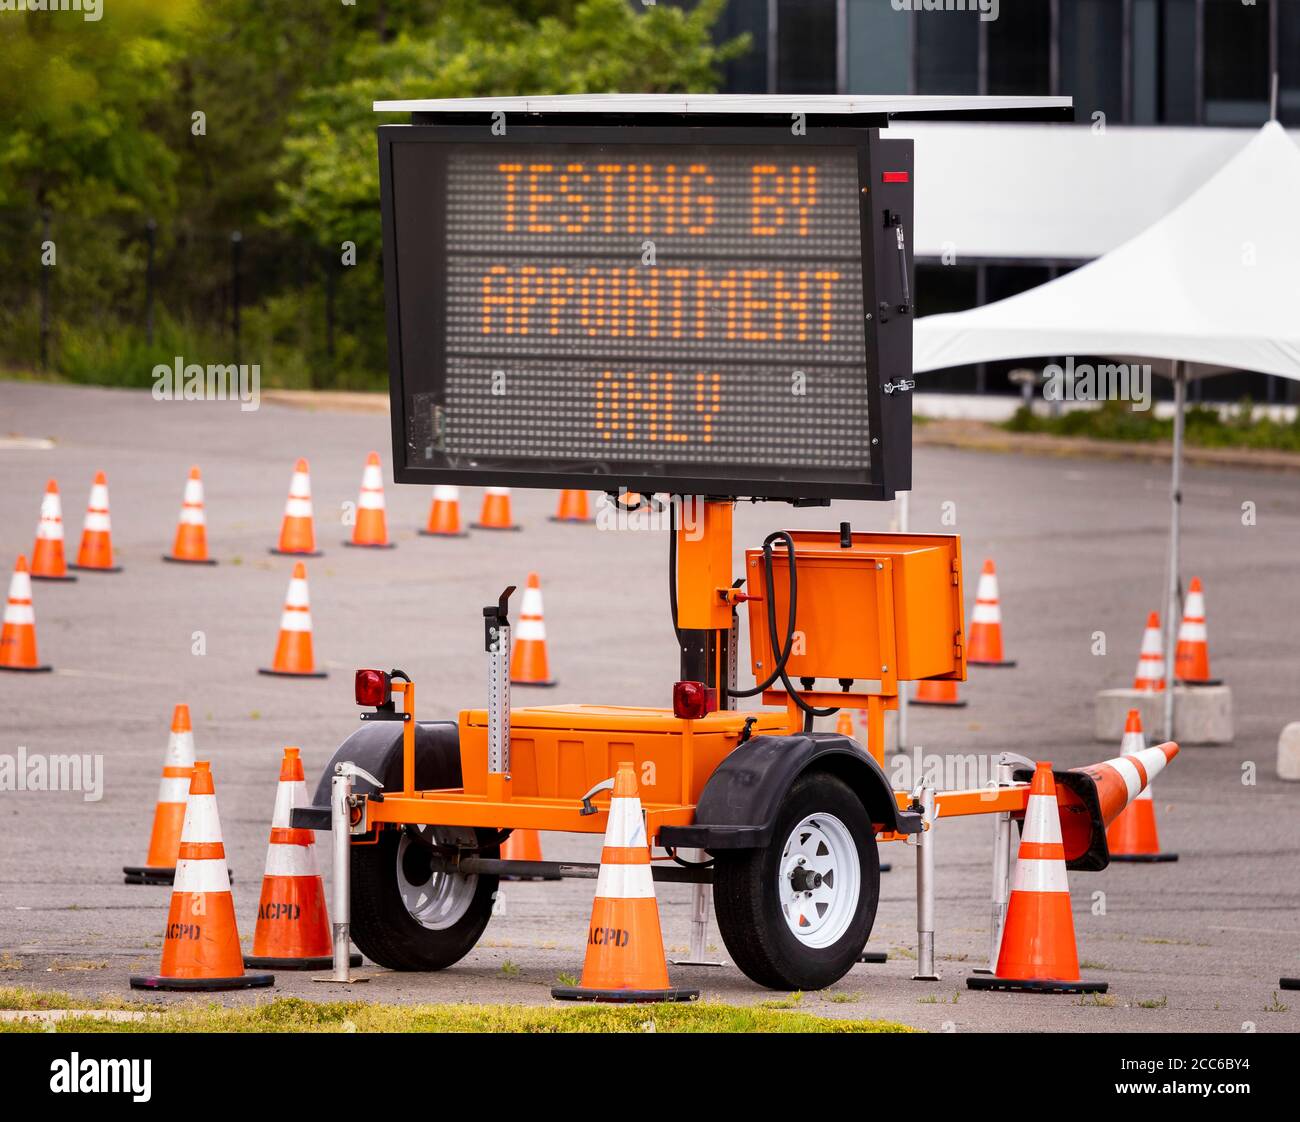 ARLINGTON, VIRGINIA, USA, MAY 11, 2020: Covid-19 testing site, signs for testing by appointment only. Stock Photo